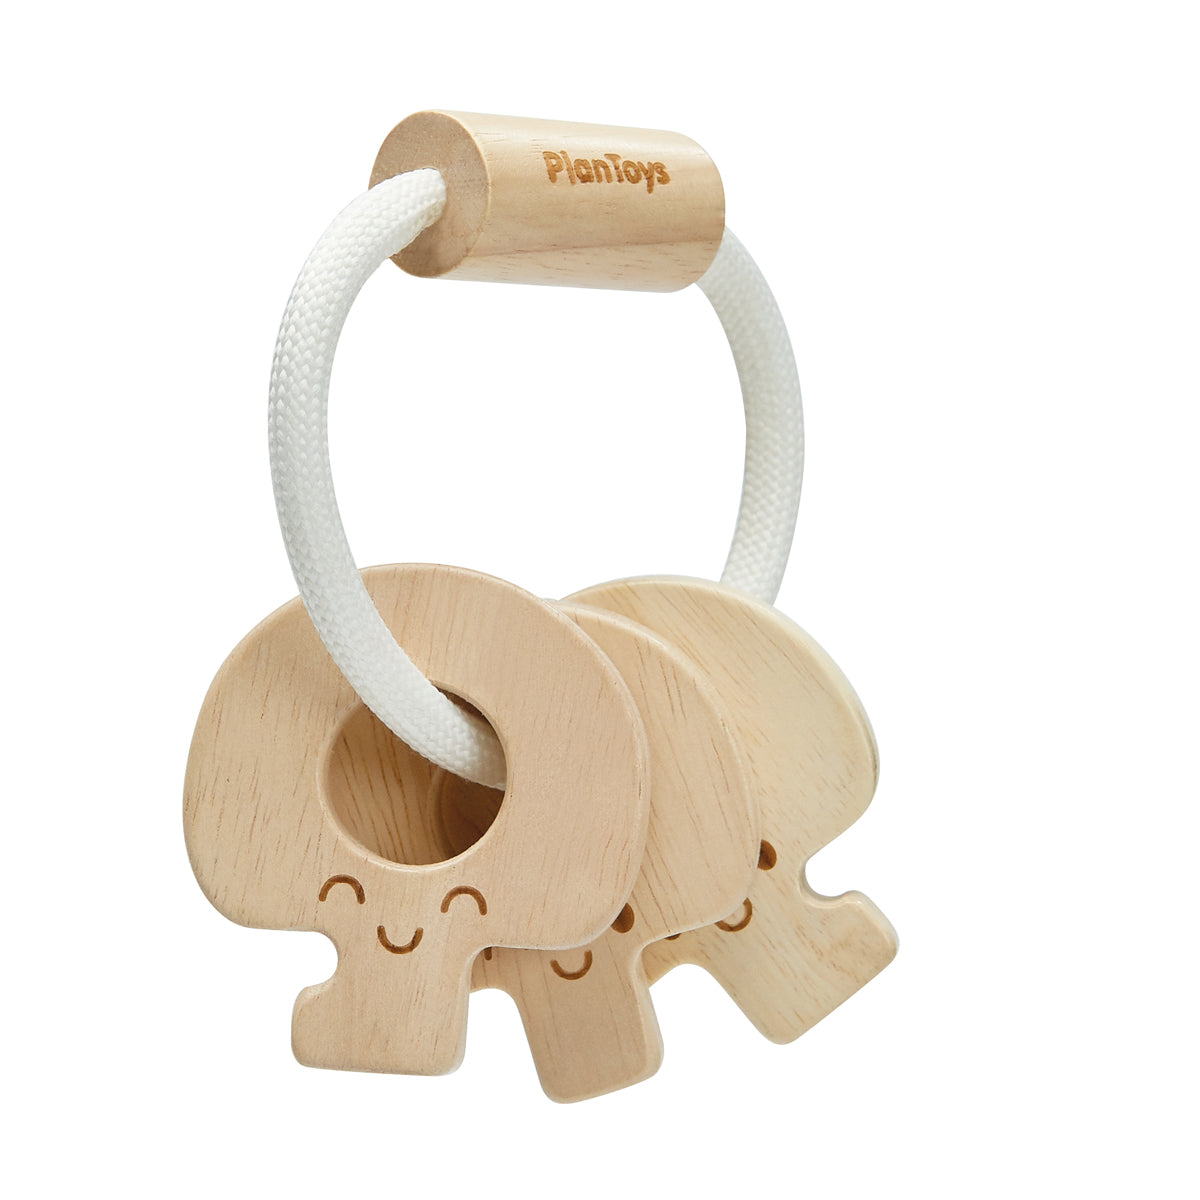 Baby Key rattle Natural Plan toys Rubber wood